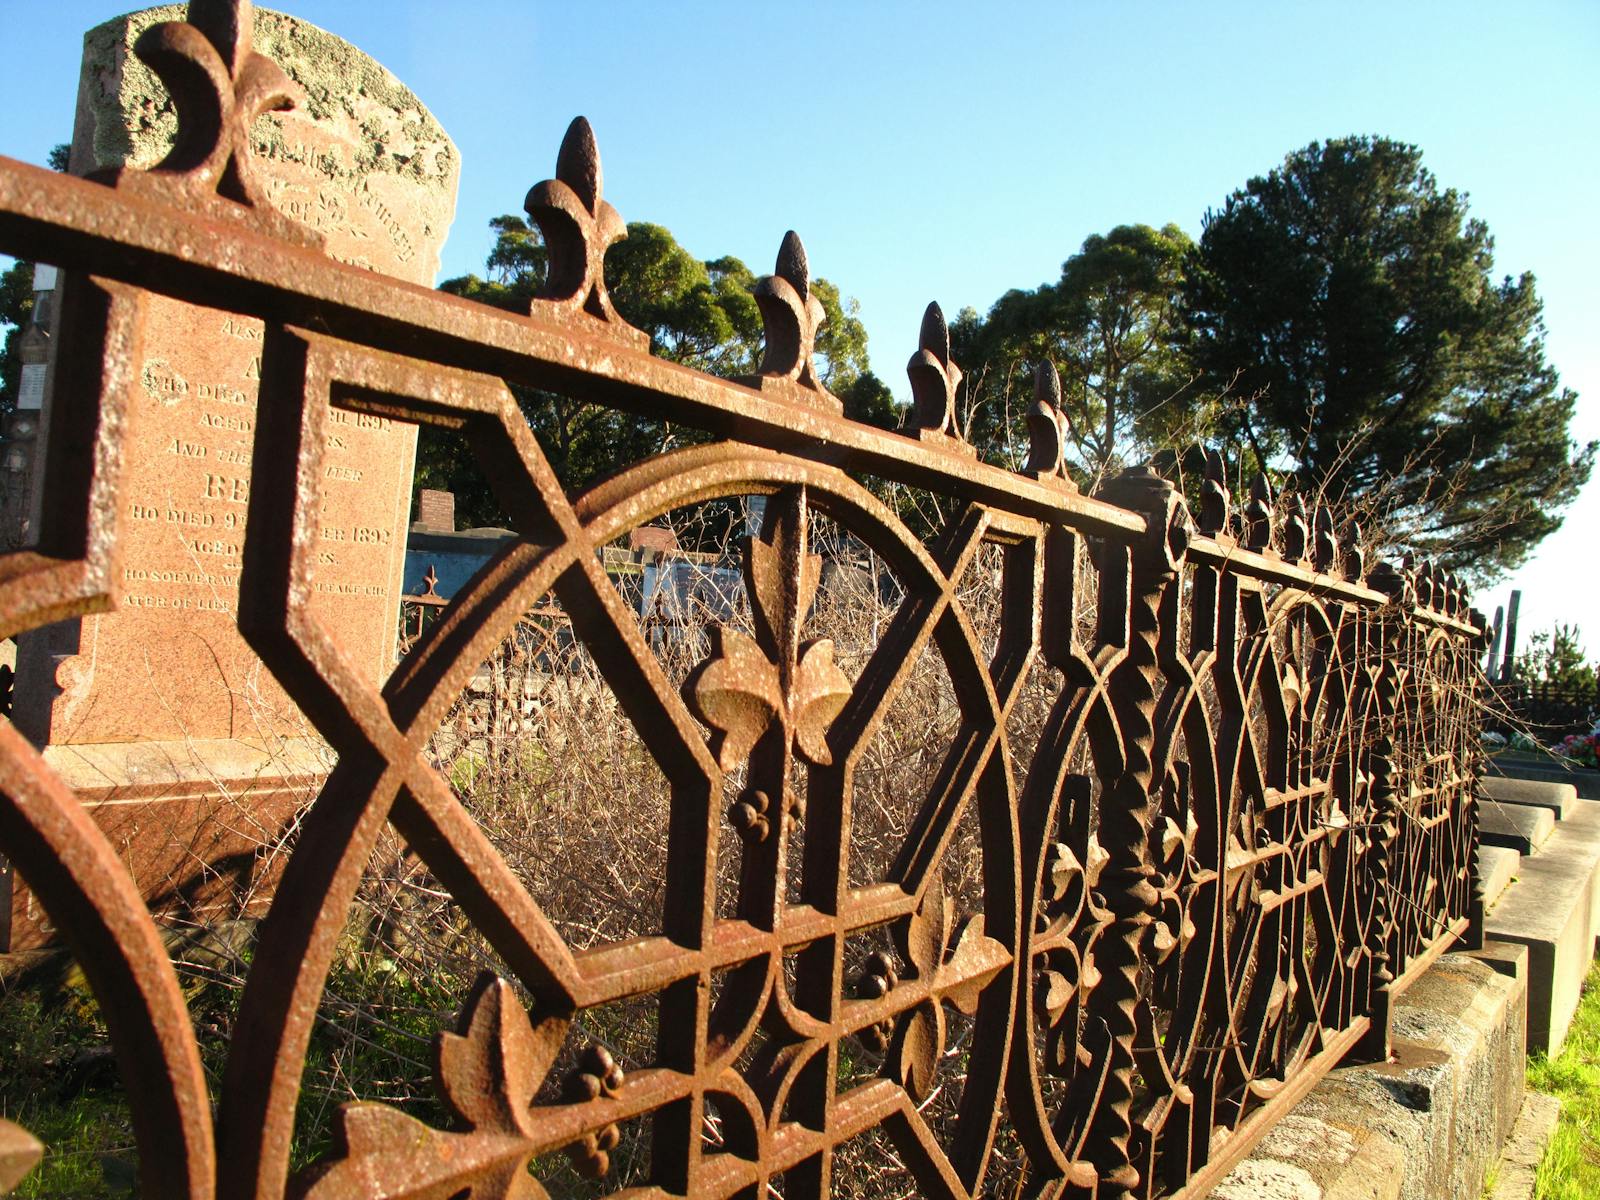 Ironwork typical in heritage cemeteries